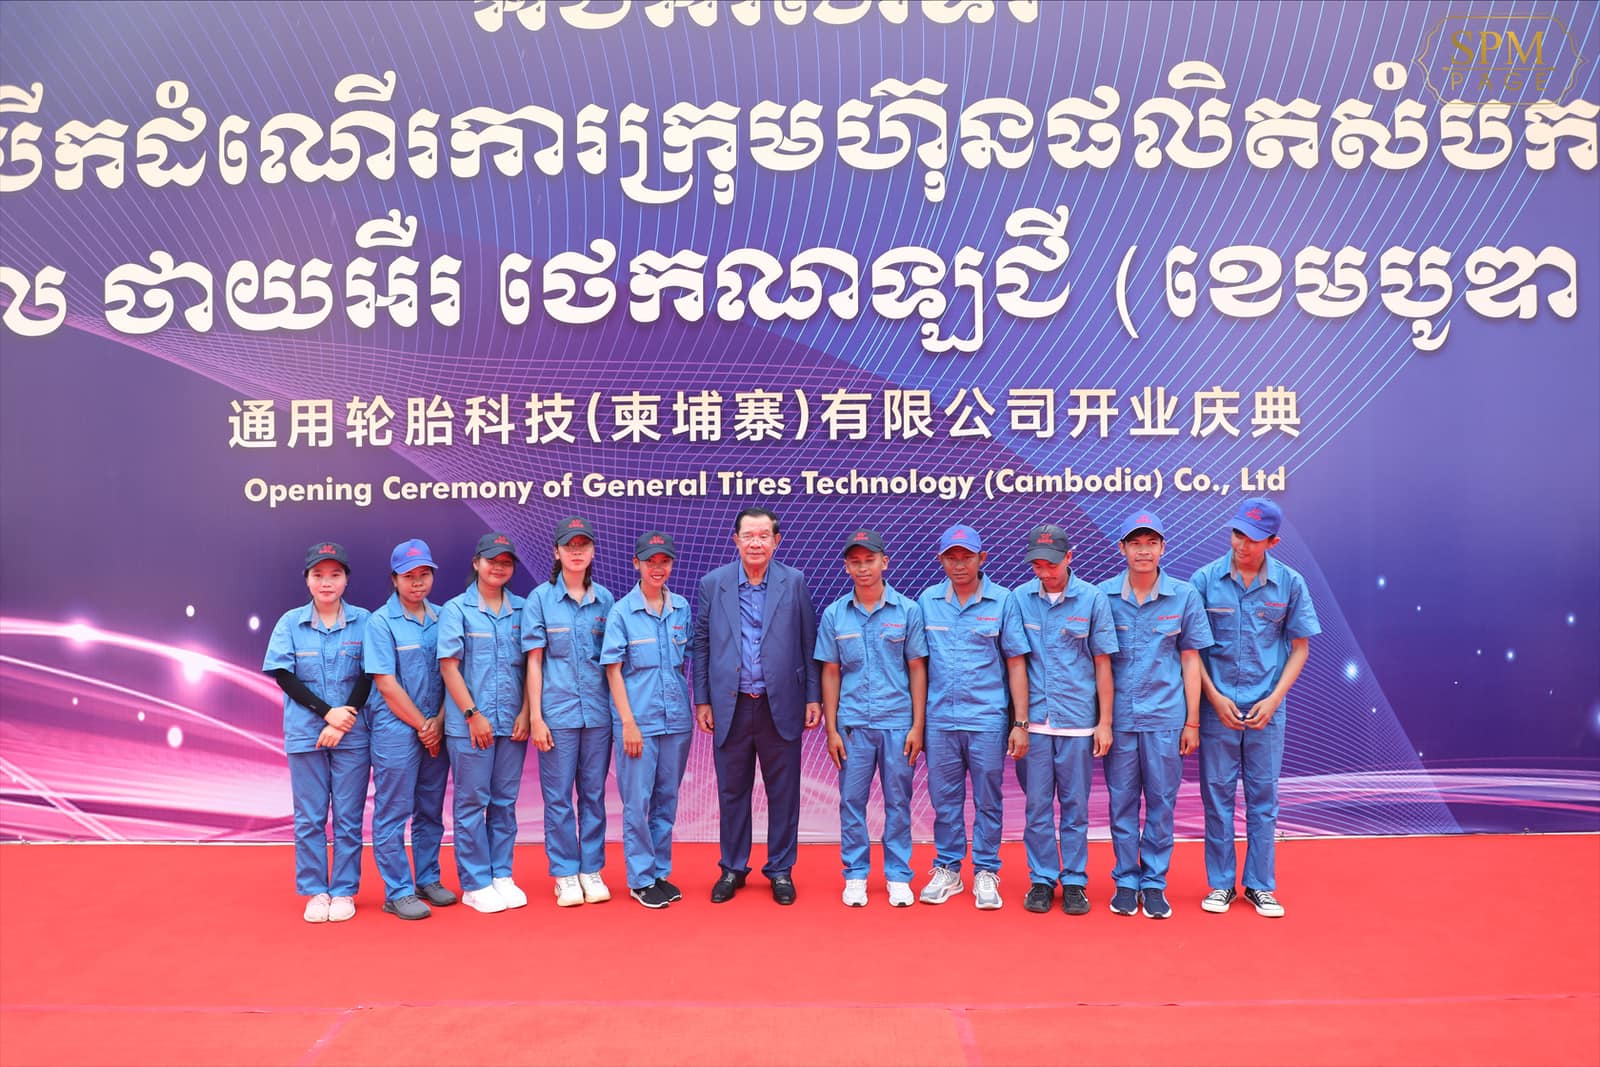 On the morning of May 22, 2023, Samdech Techo Hun Sen presides over the get-together with workers and employees, visit exhibition on various achievements and preside over the inauguration ceremony of General Tyre Technology factory at Sihanoukville Special Economic Zone.